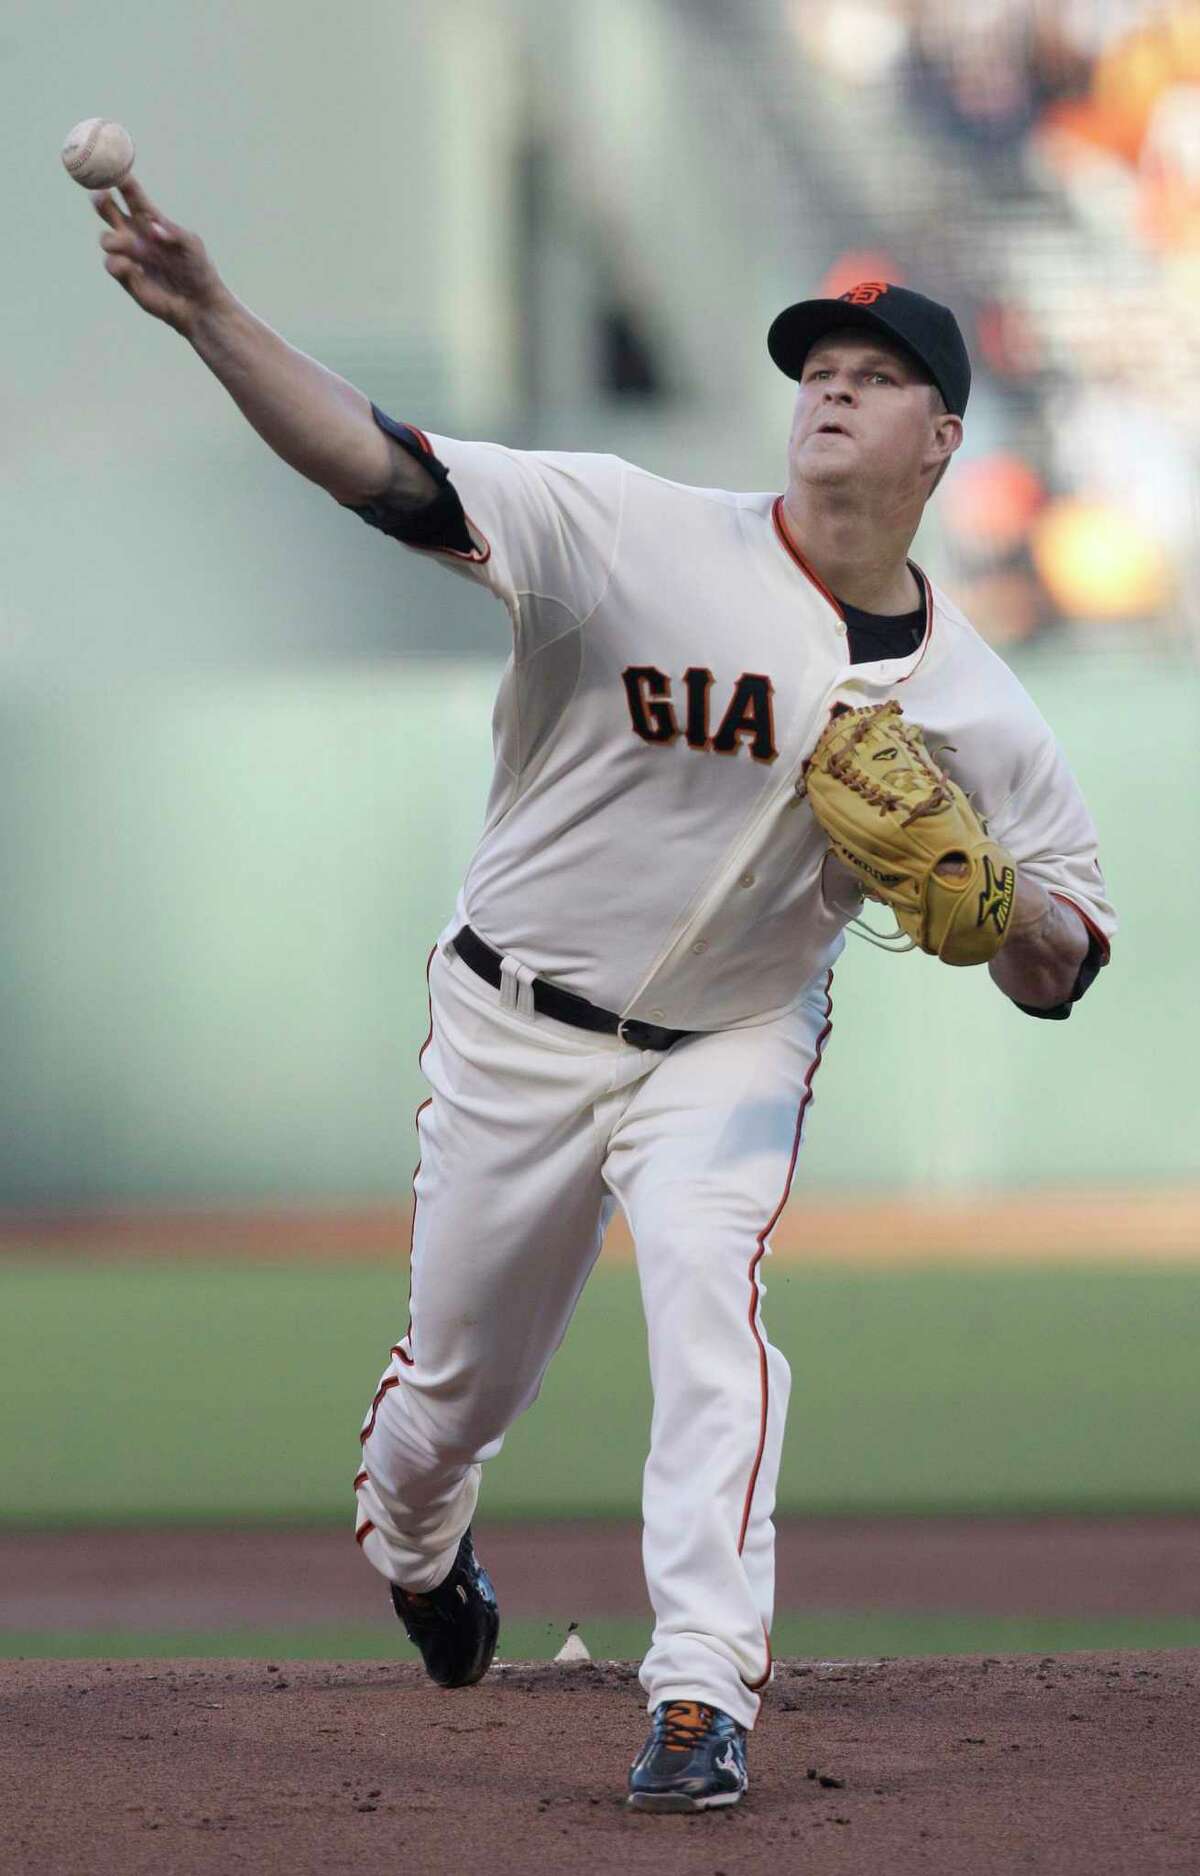 Matt Cain pitches first perfect game in Giants franchise history to beat  Astros